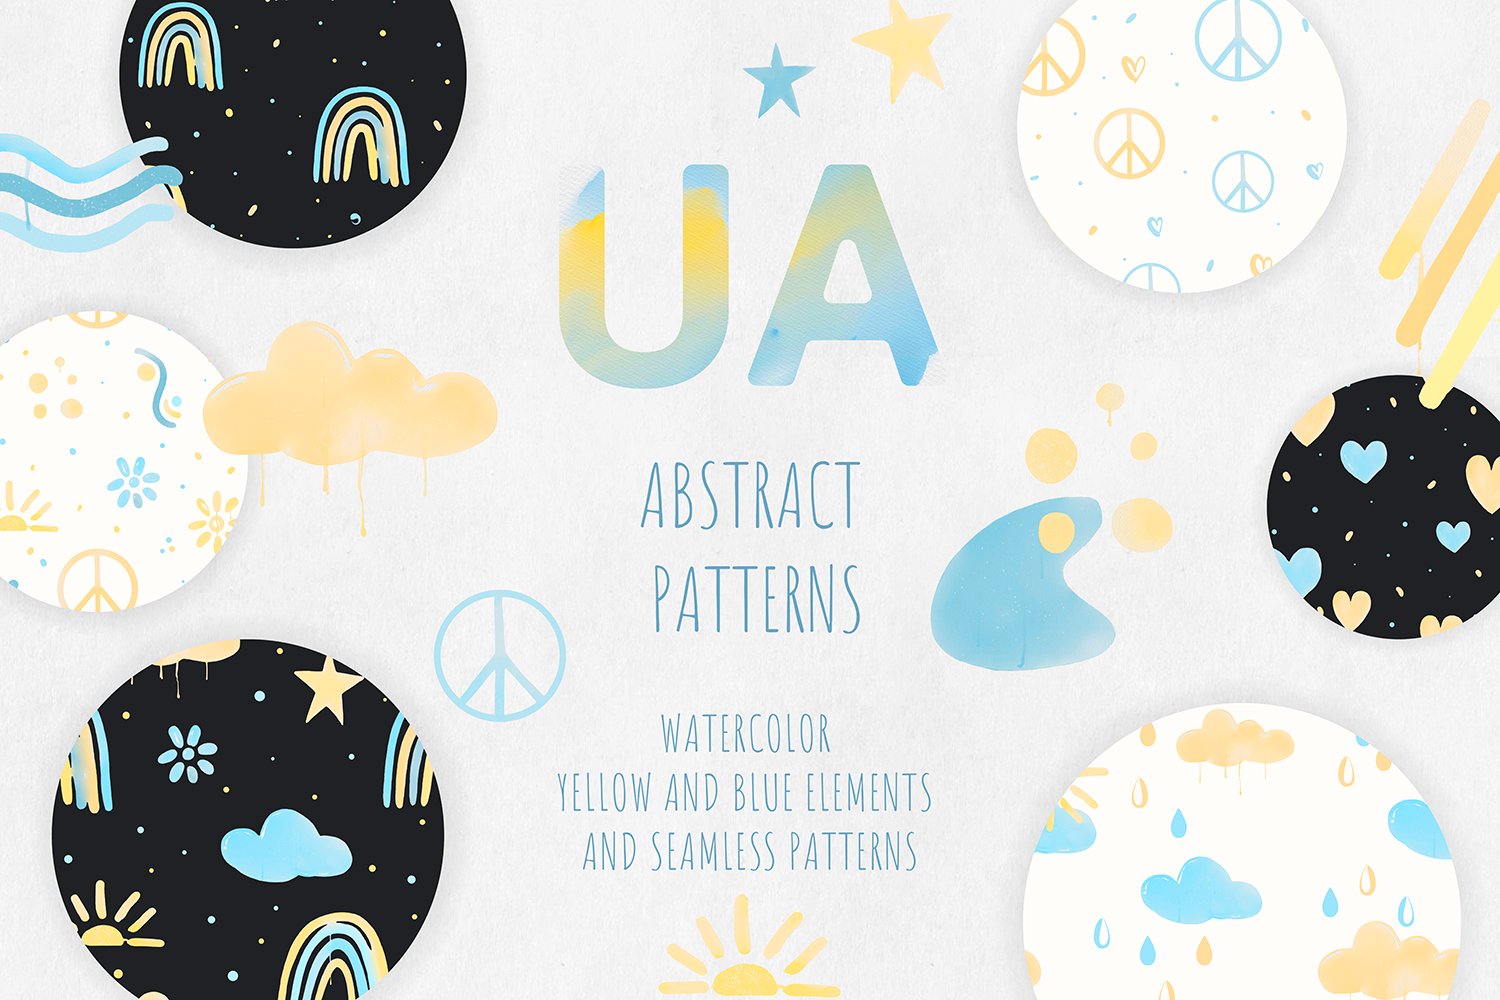 UA Abstract watercolor patterns cover image.